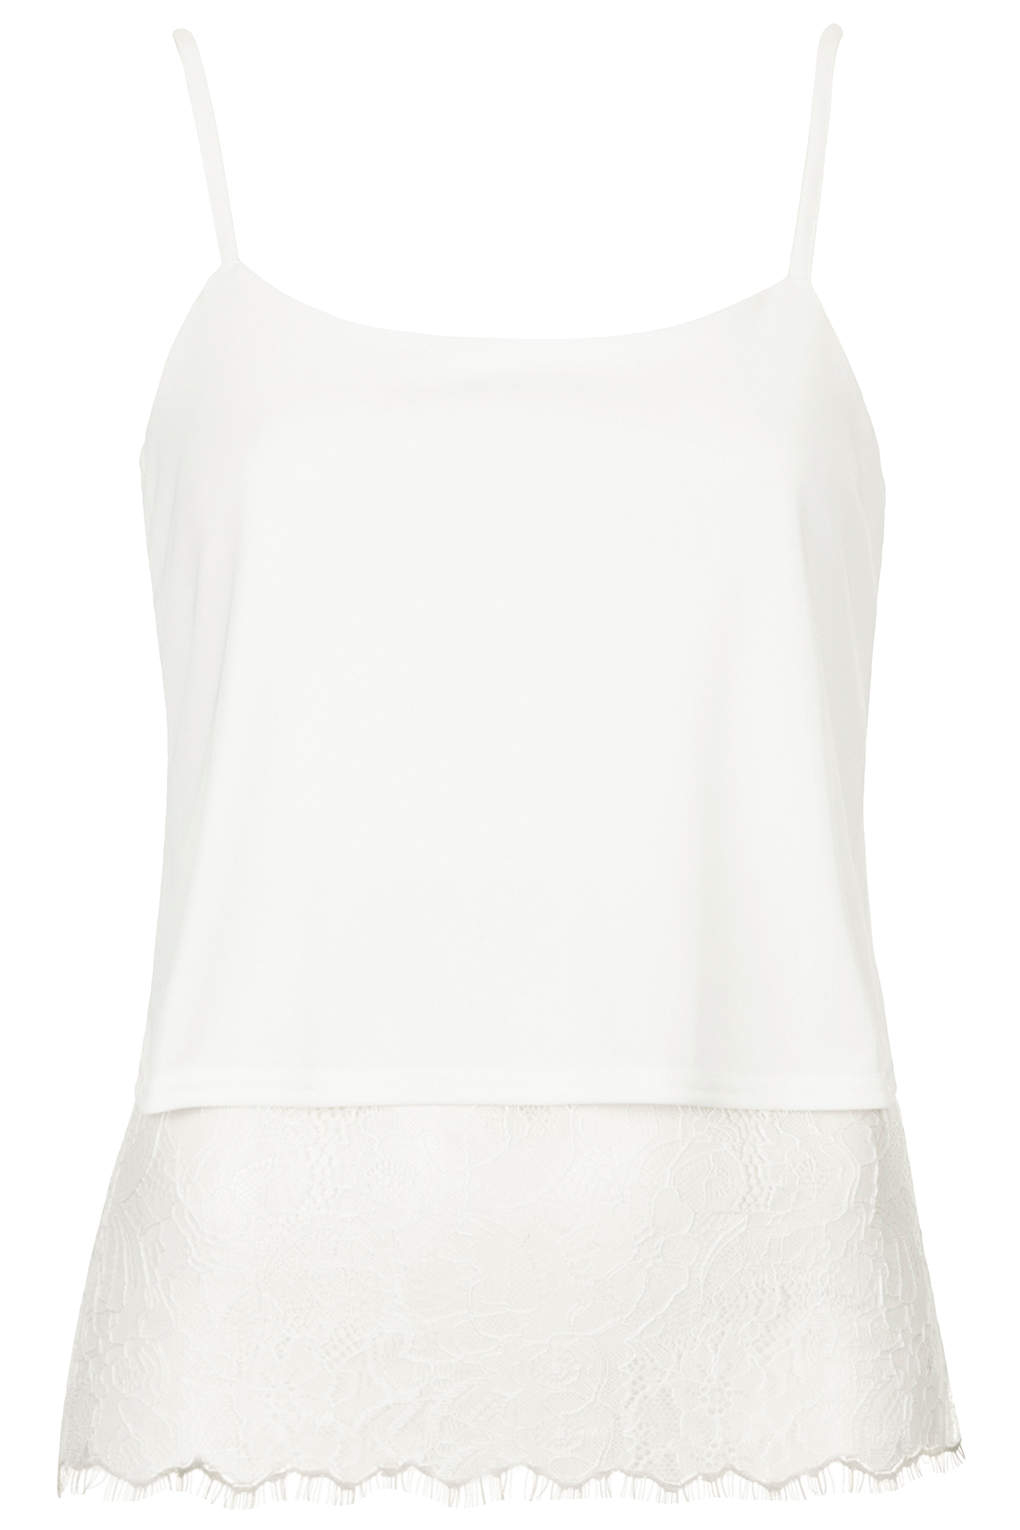 Lyst - Topshop Lace Hem Cami in White